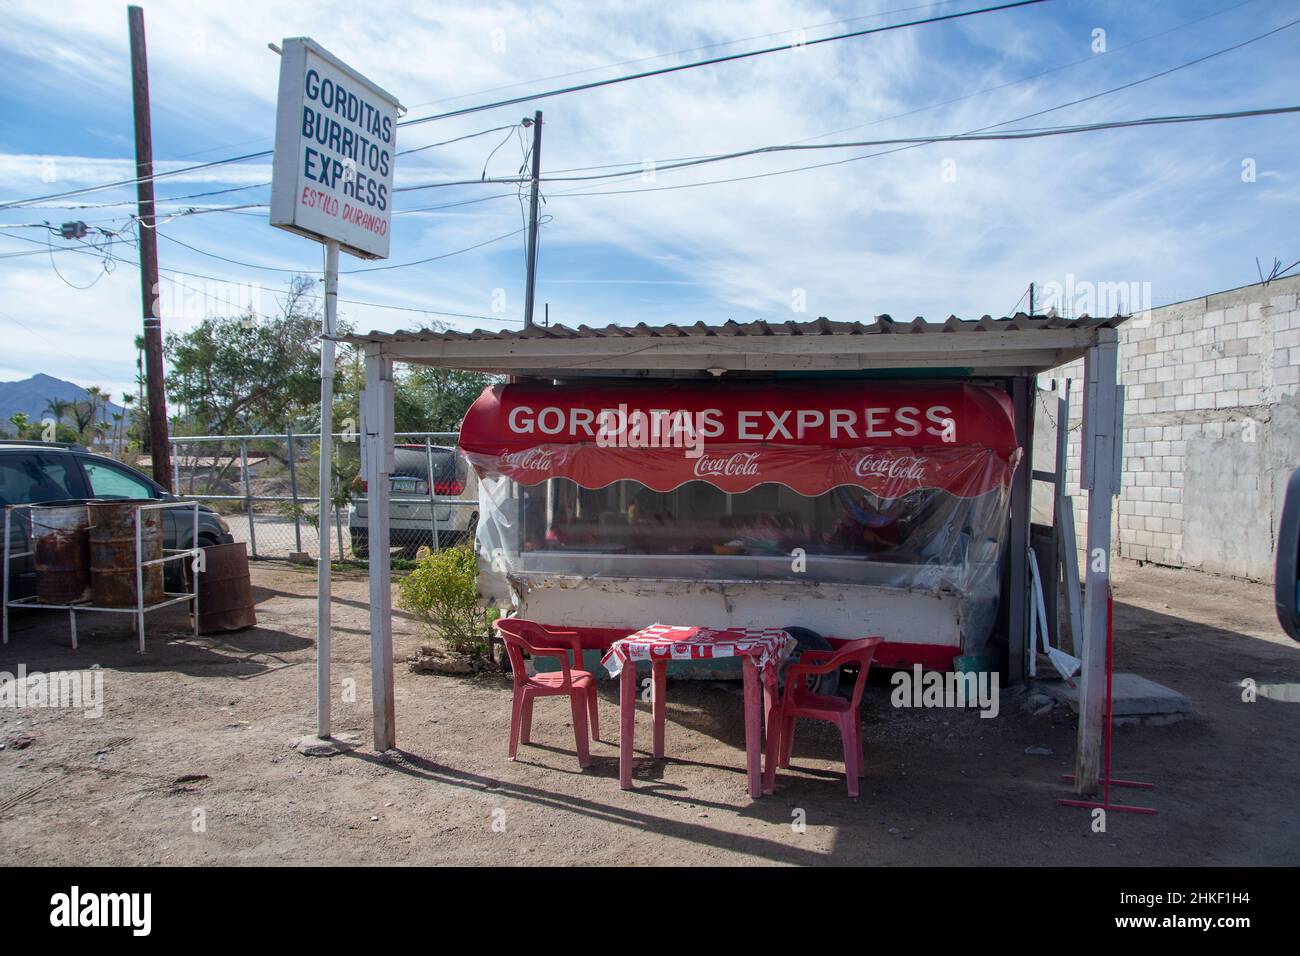 A restaurant called the Gorditas Express, located in the city of Soytona, Baja California, Mexico Stock Photo